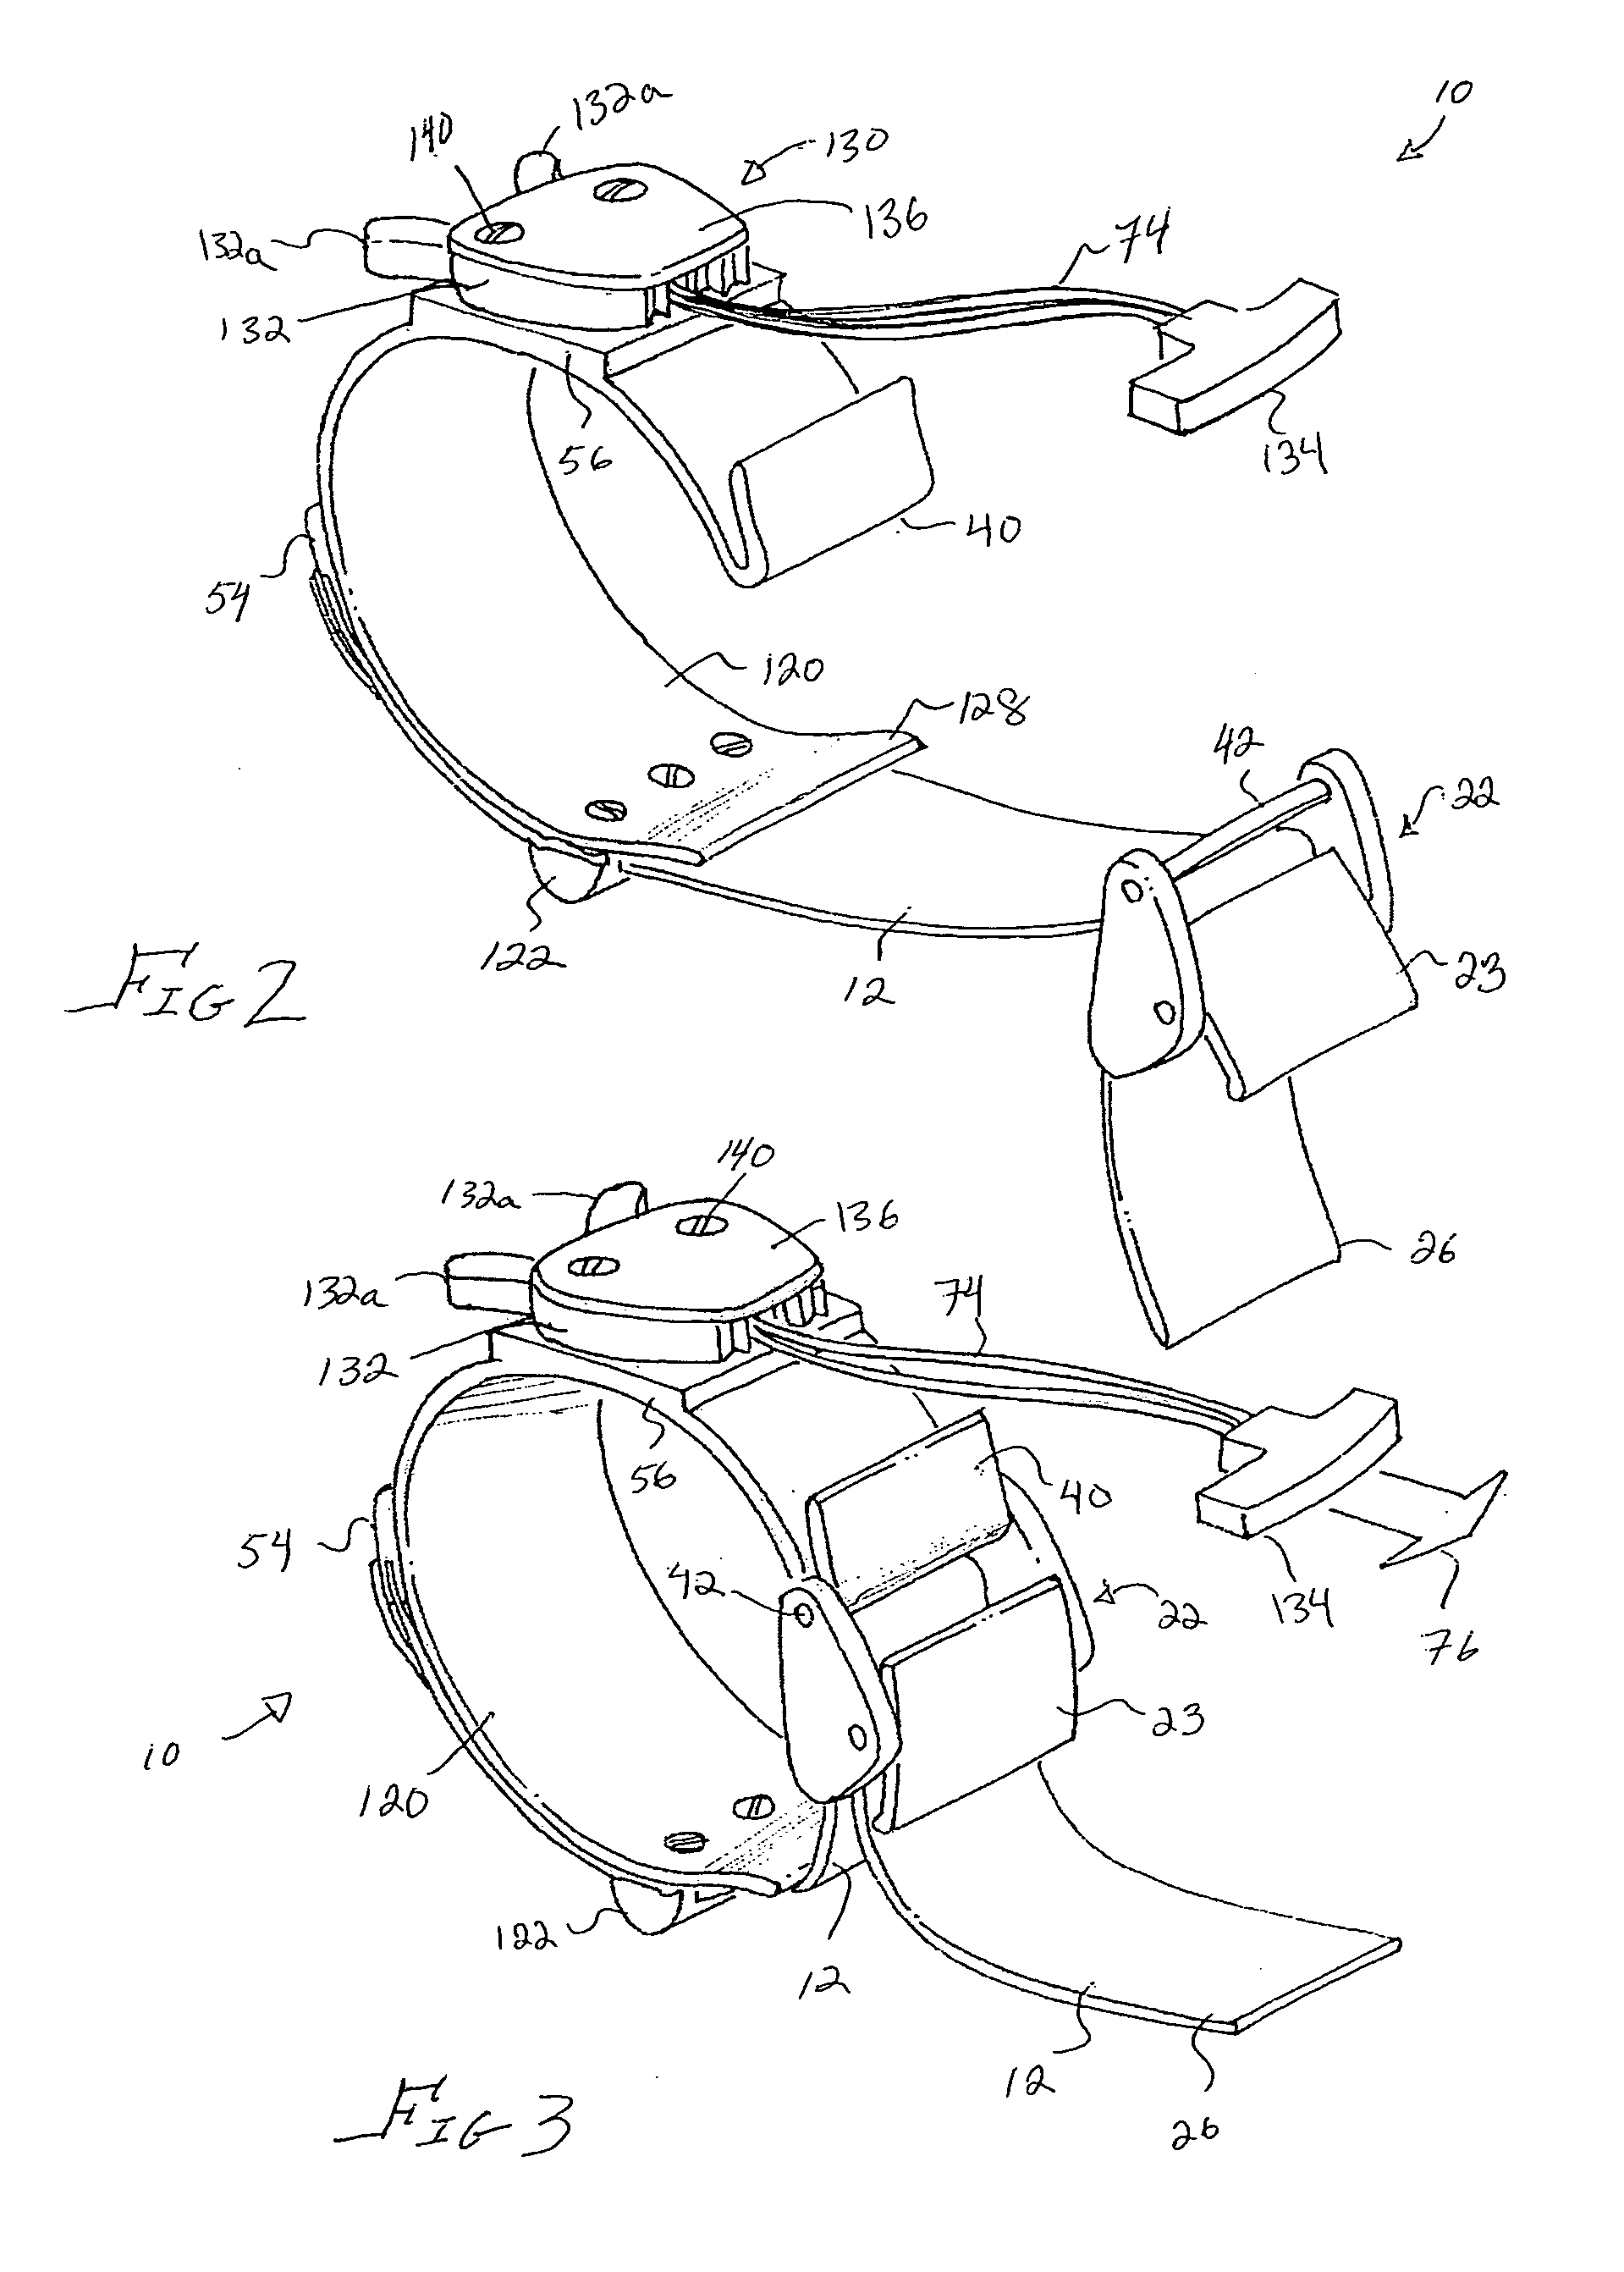 Field circulatory constriction device